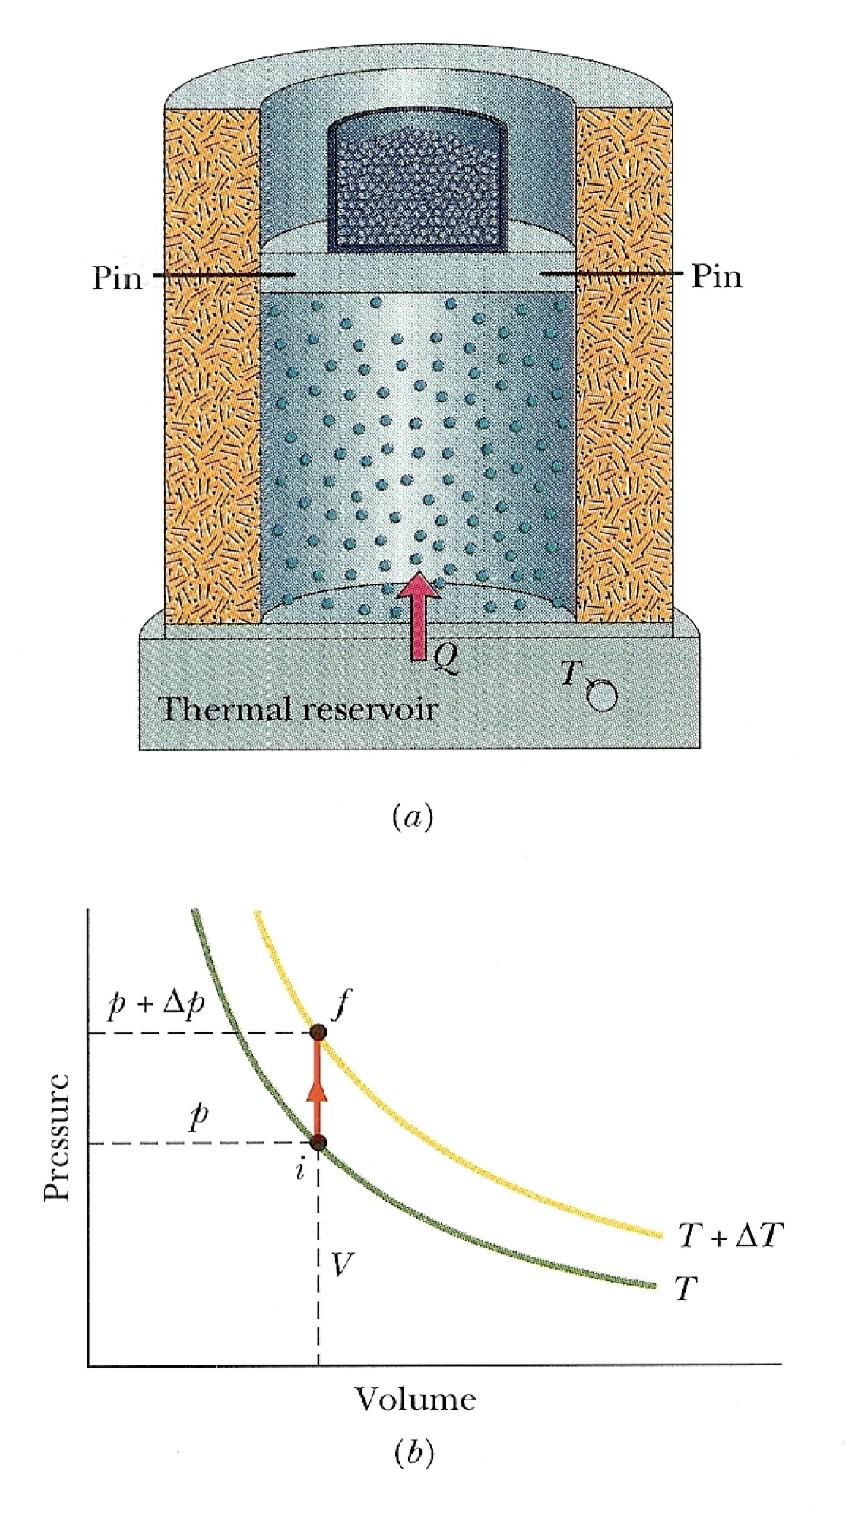 Molar specific heat at constant volume Figure shows n moles of an ideal gas at pressure P and temperature T, confined to a cylinder of fixed volume V.